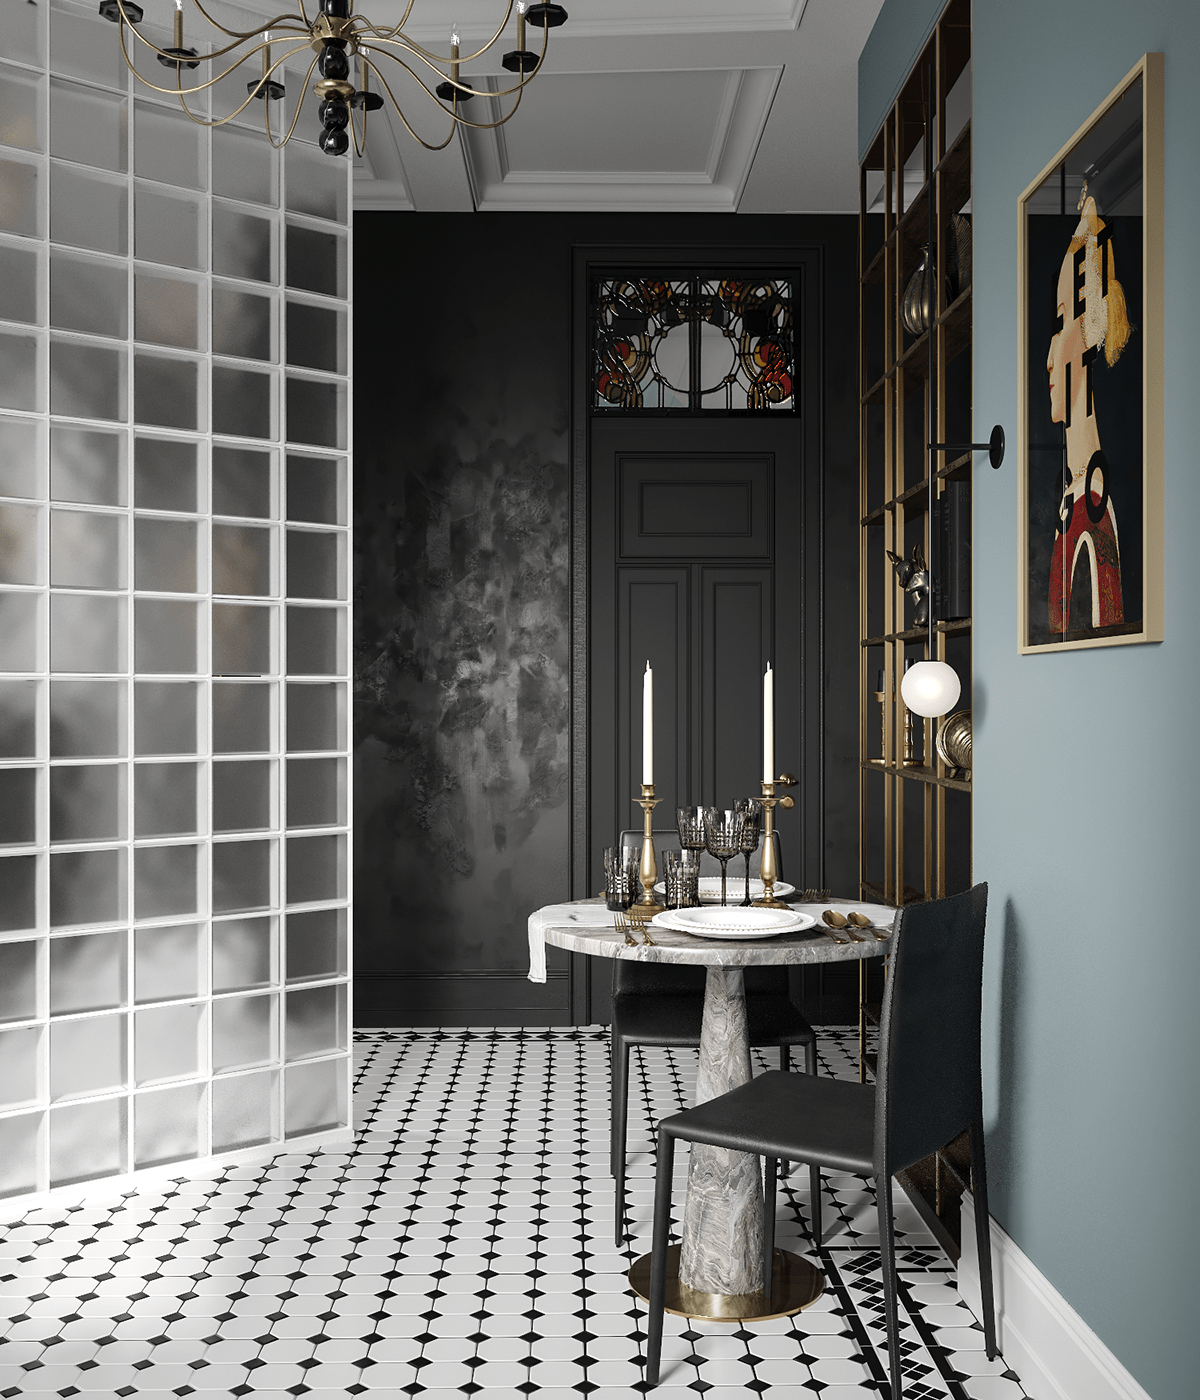 The vibrant patterns on the door provide endless artistic inspiration, while the glamorous elongated wax candles placed on the dining table add solemnity and sophistication.